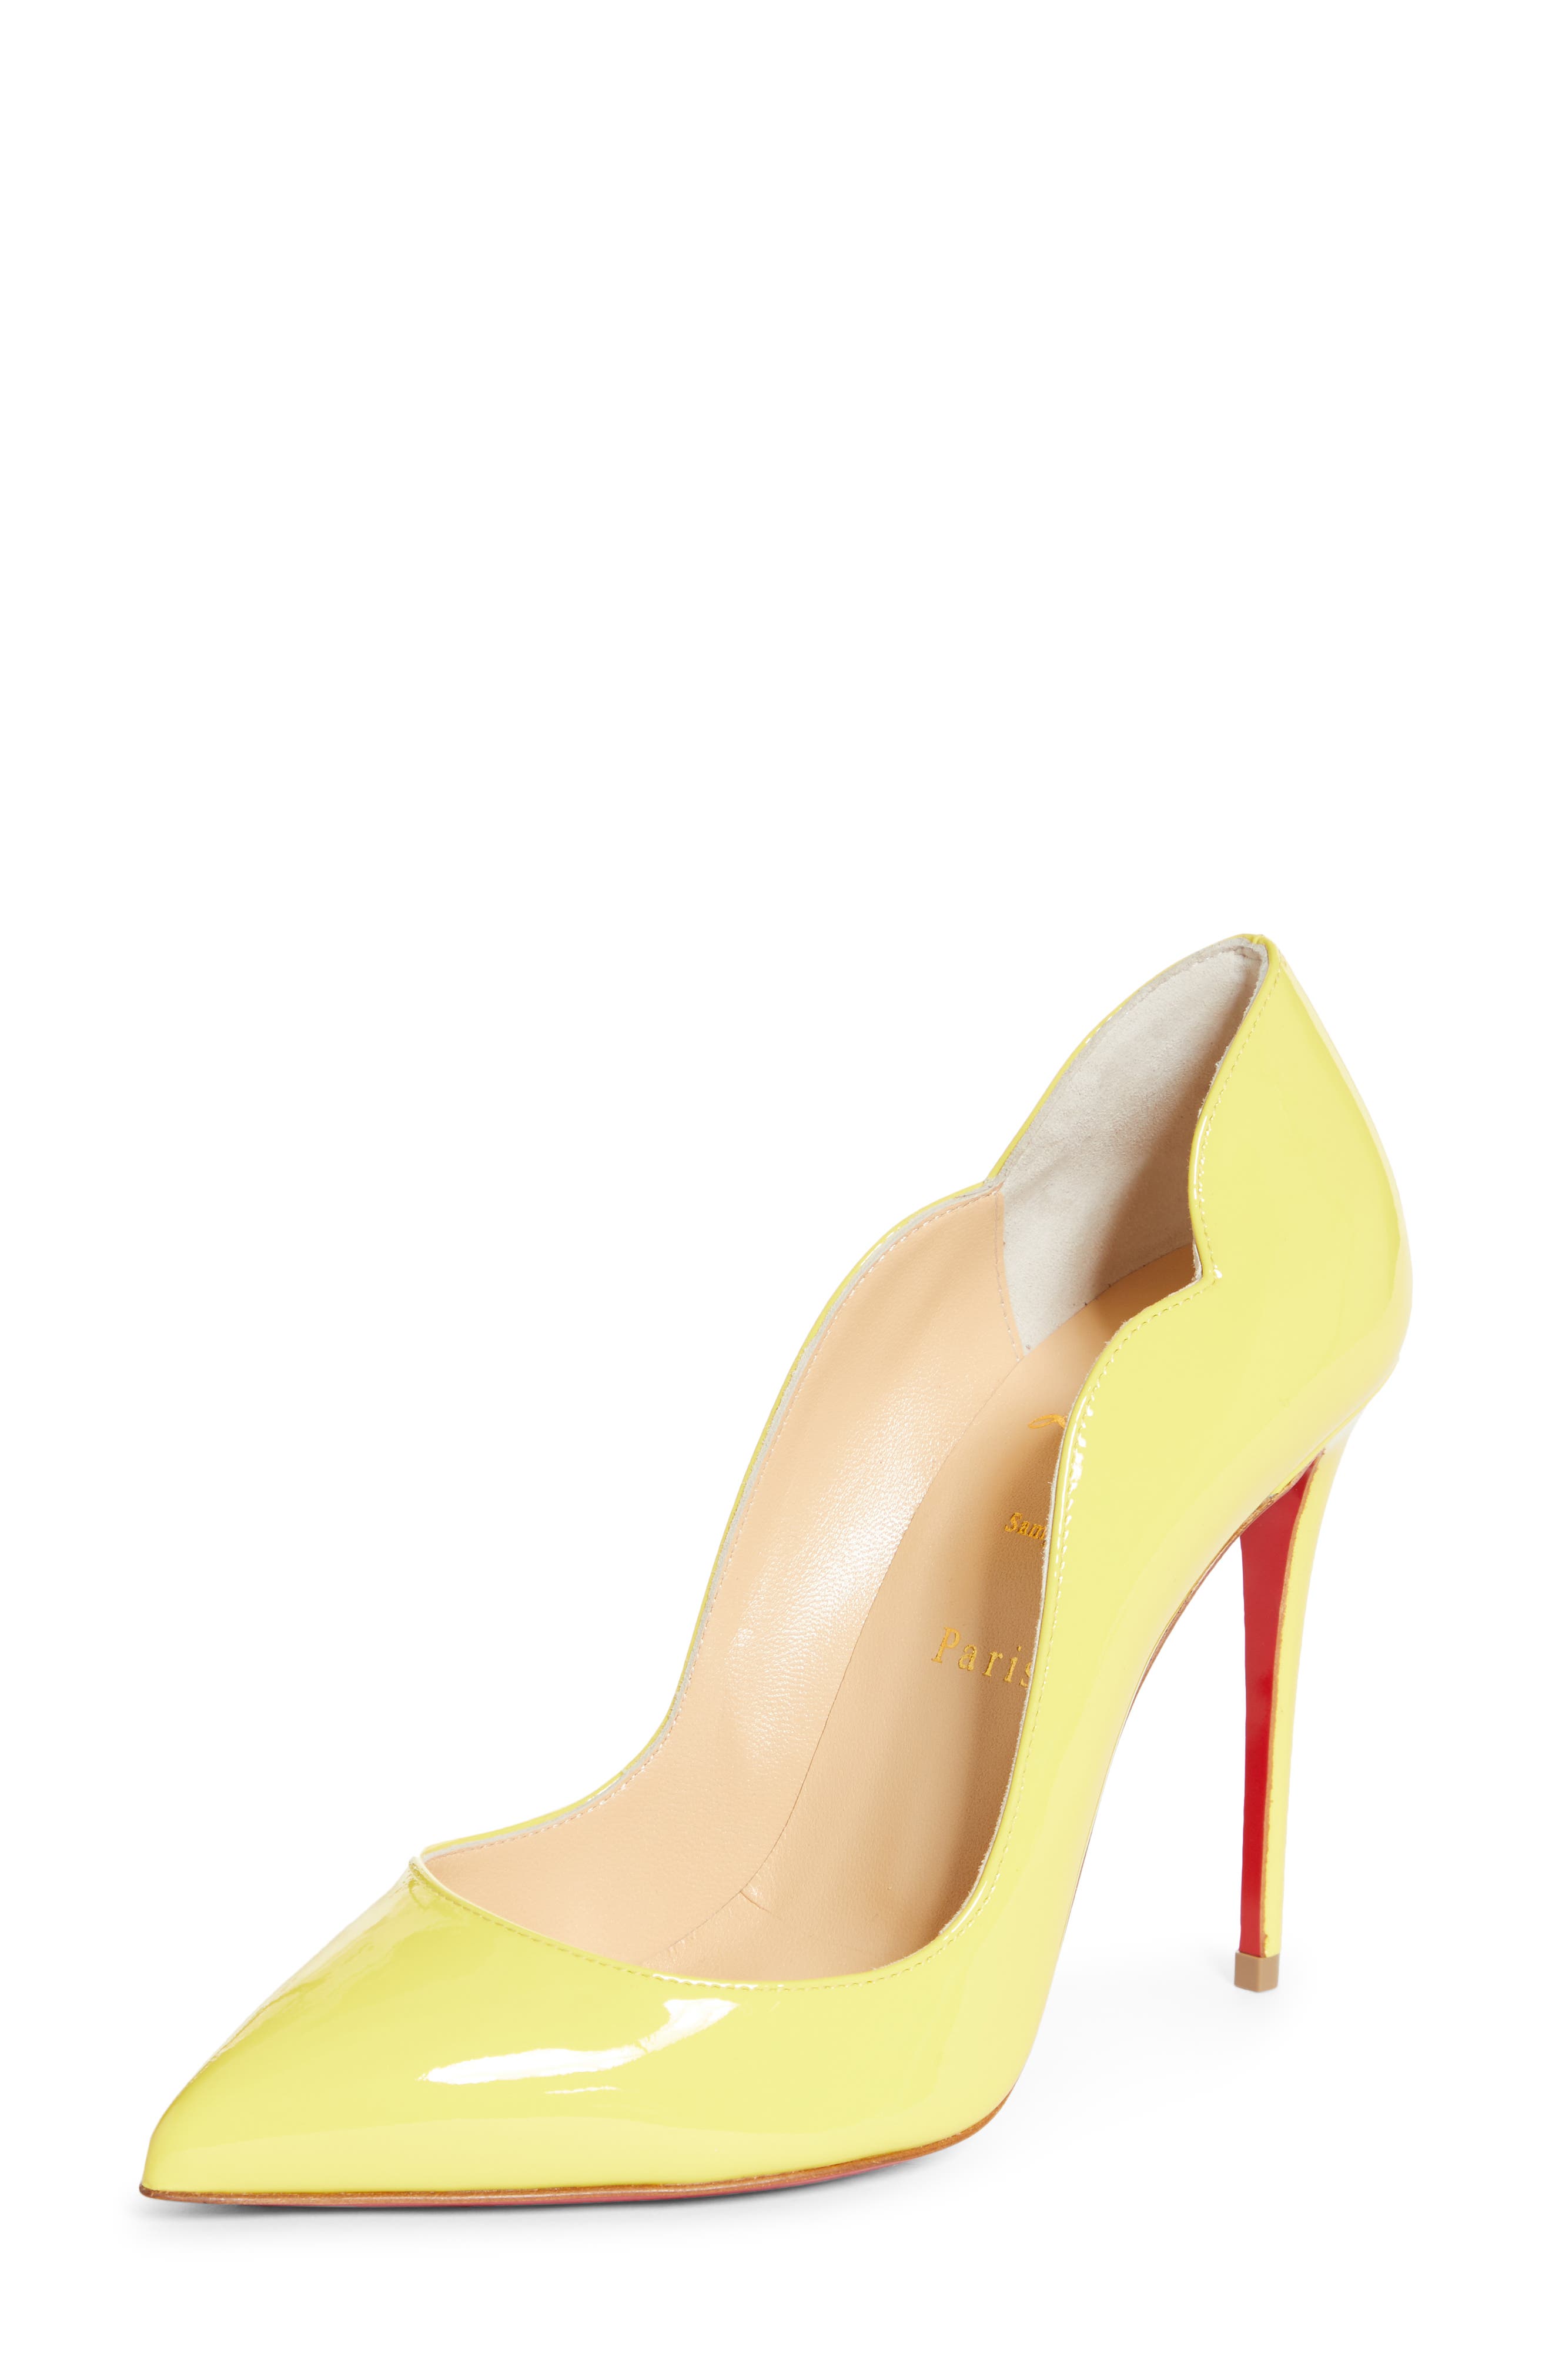 Christian Louboutin Hot Chick Scallop Pointed Toe Pump in White at Nordstrom